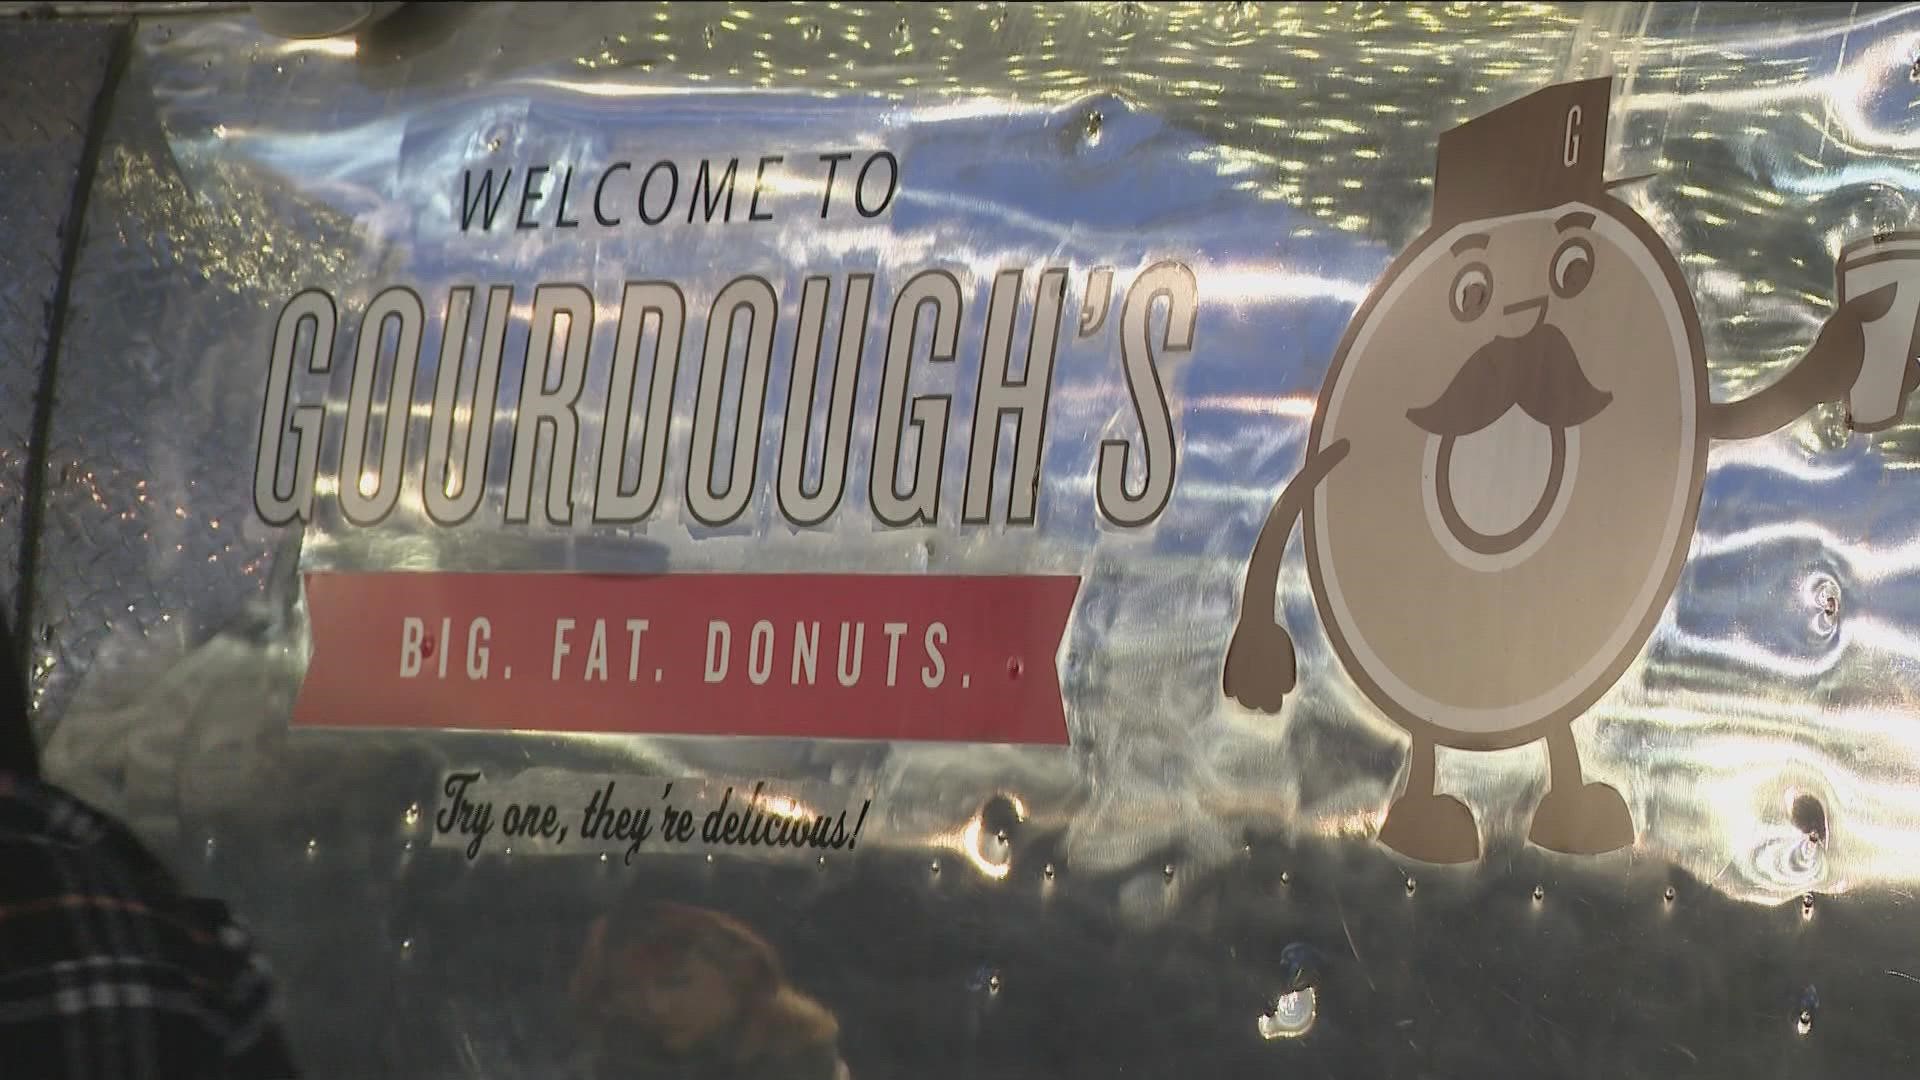 Bastrop County deputies say they recovered a food truck trailer that was stolen from Gourdough's Doughnuts in Austin. They found it in Cedar Creek.